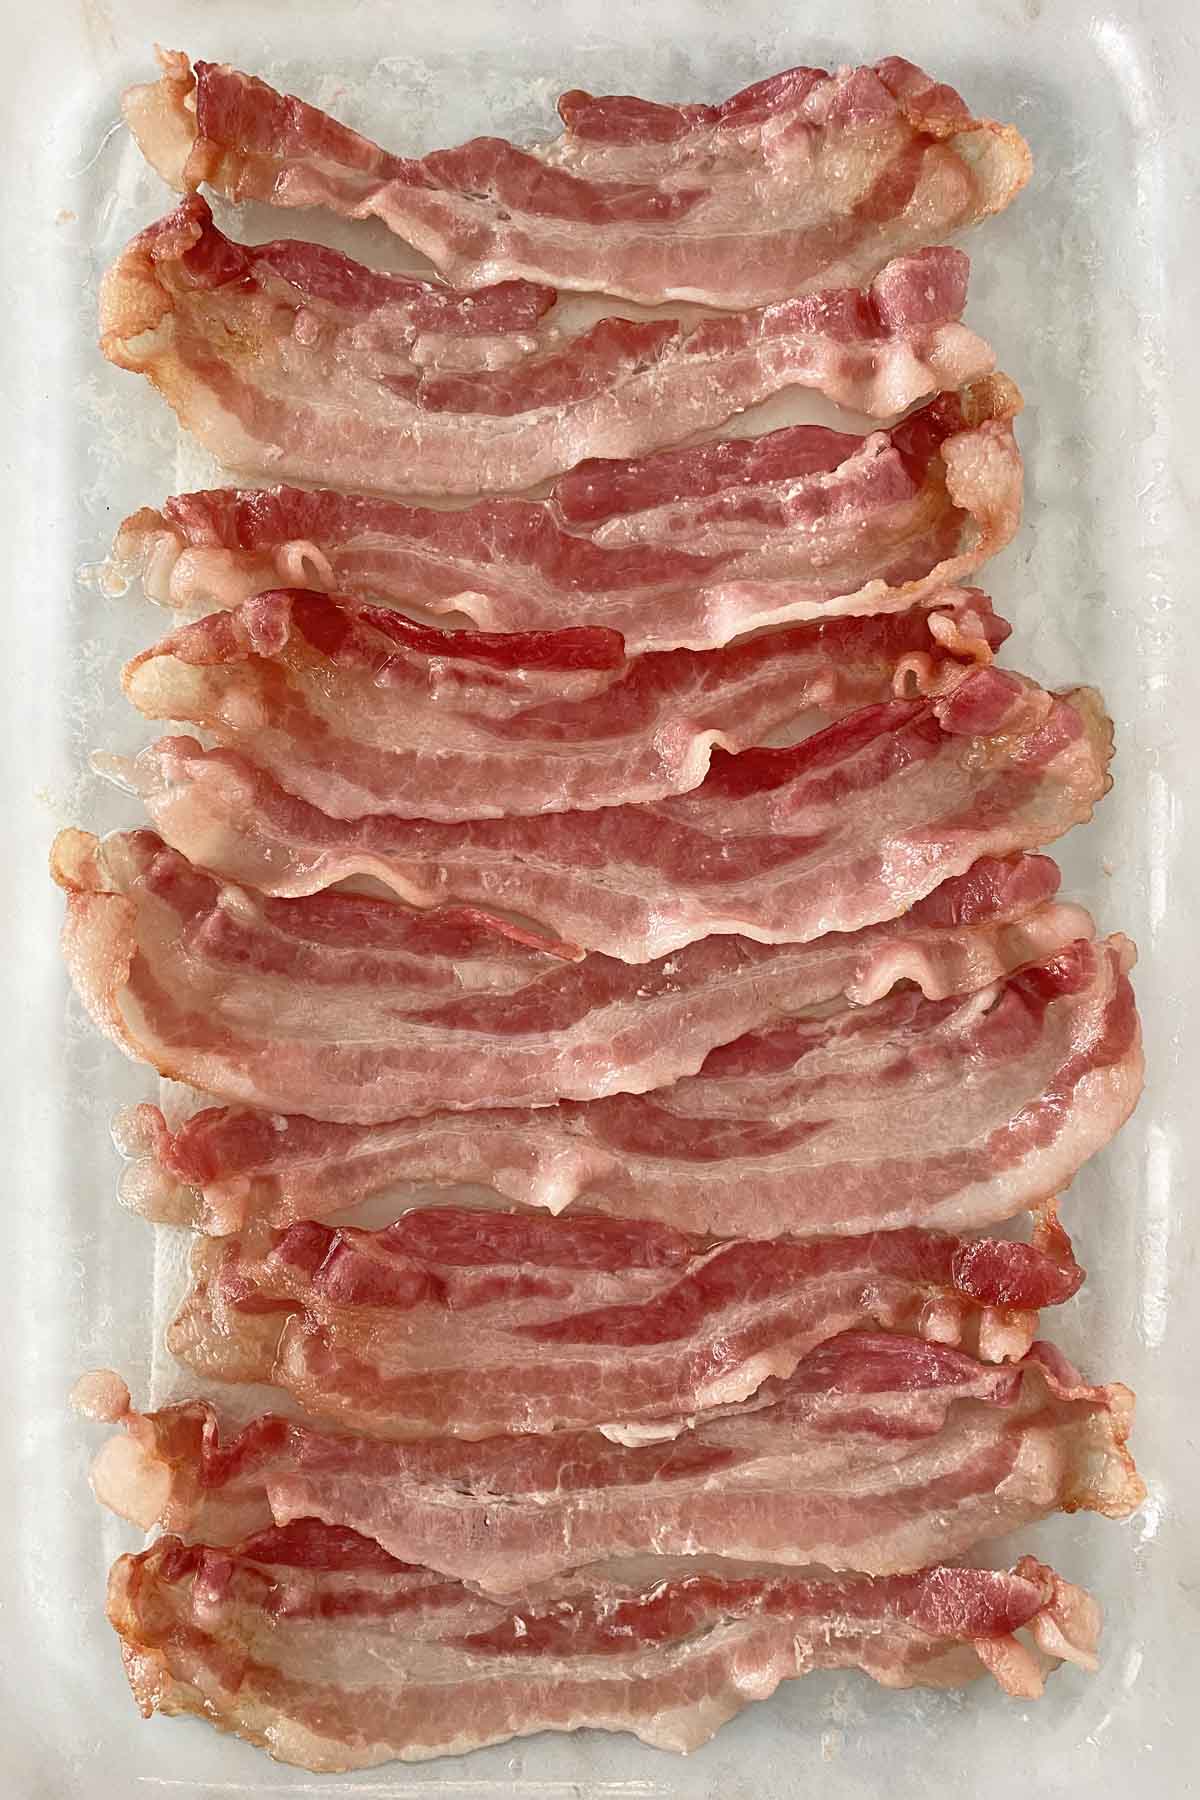 10 strips of partially cooked microwave bacon in a glass baking dish.